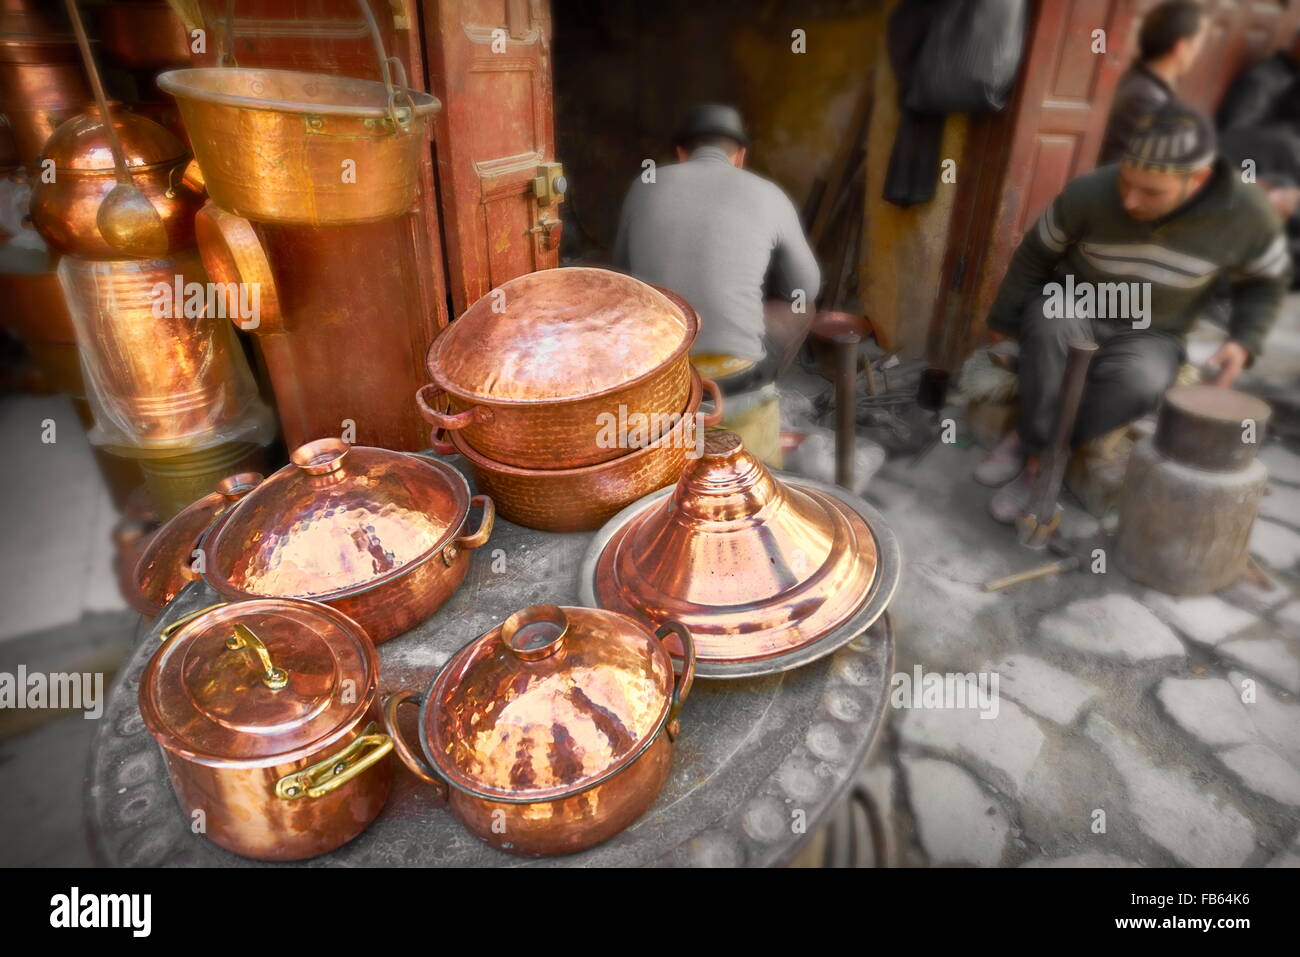 Fez, Medina - Metalworkers workshops in the Place el Seffarine. Morocco Stock Photo